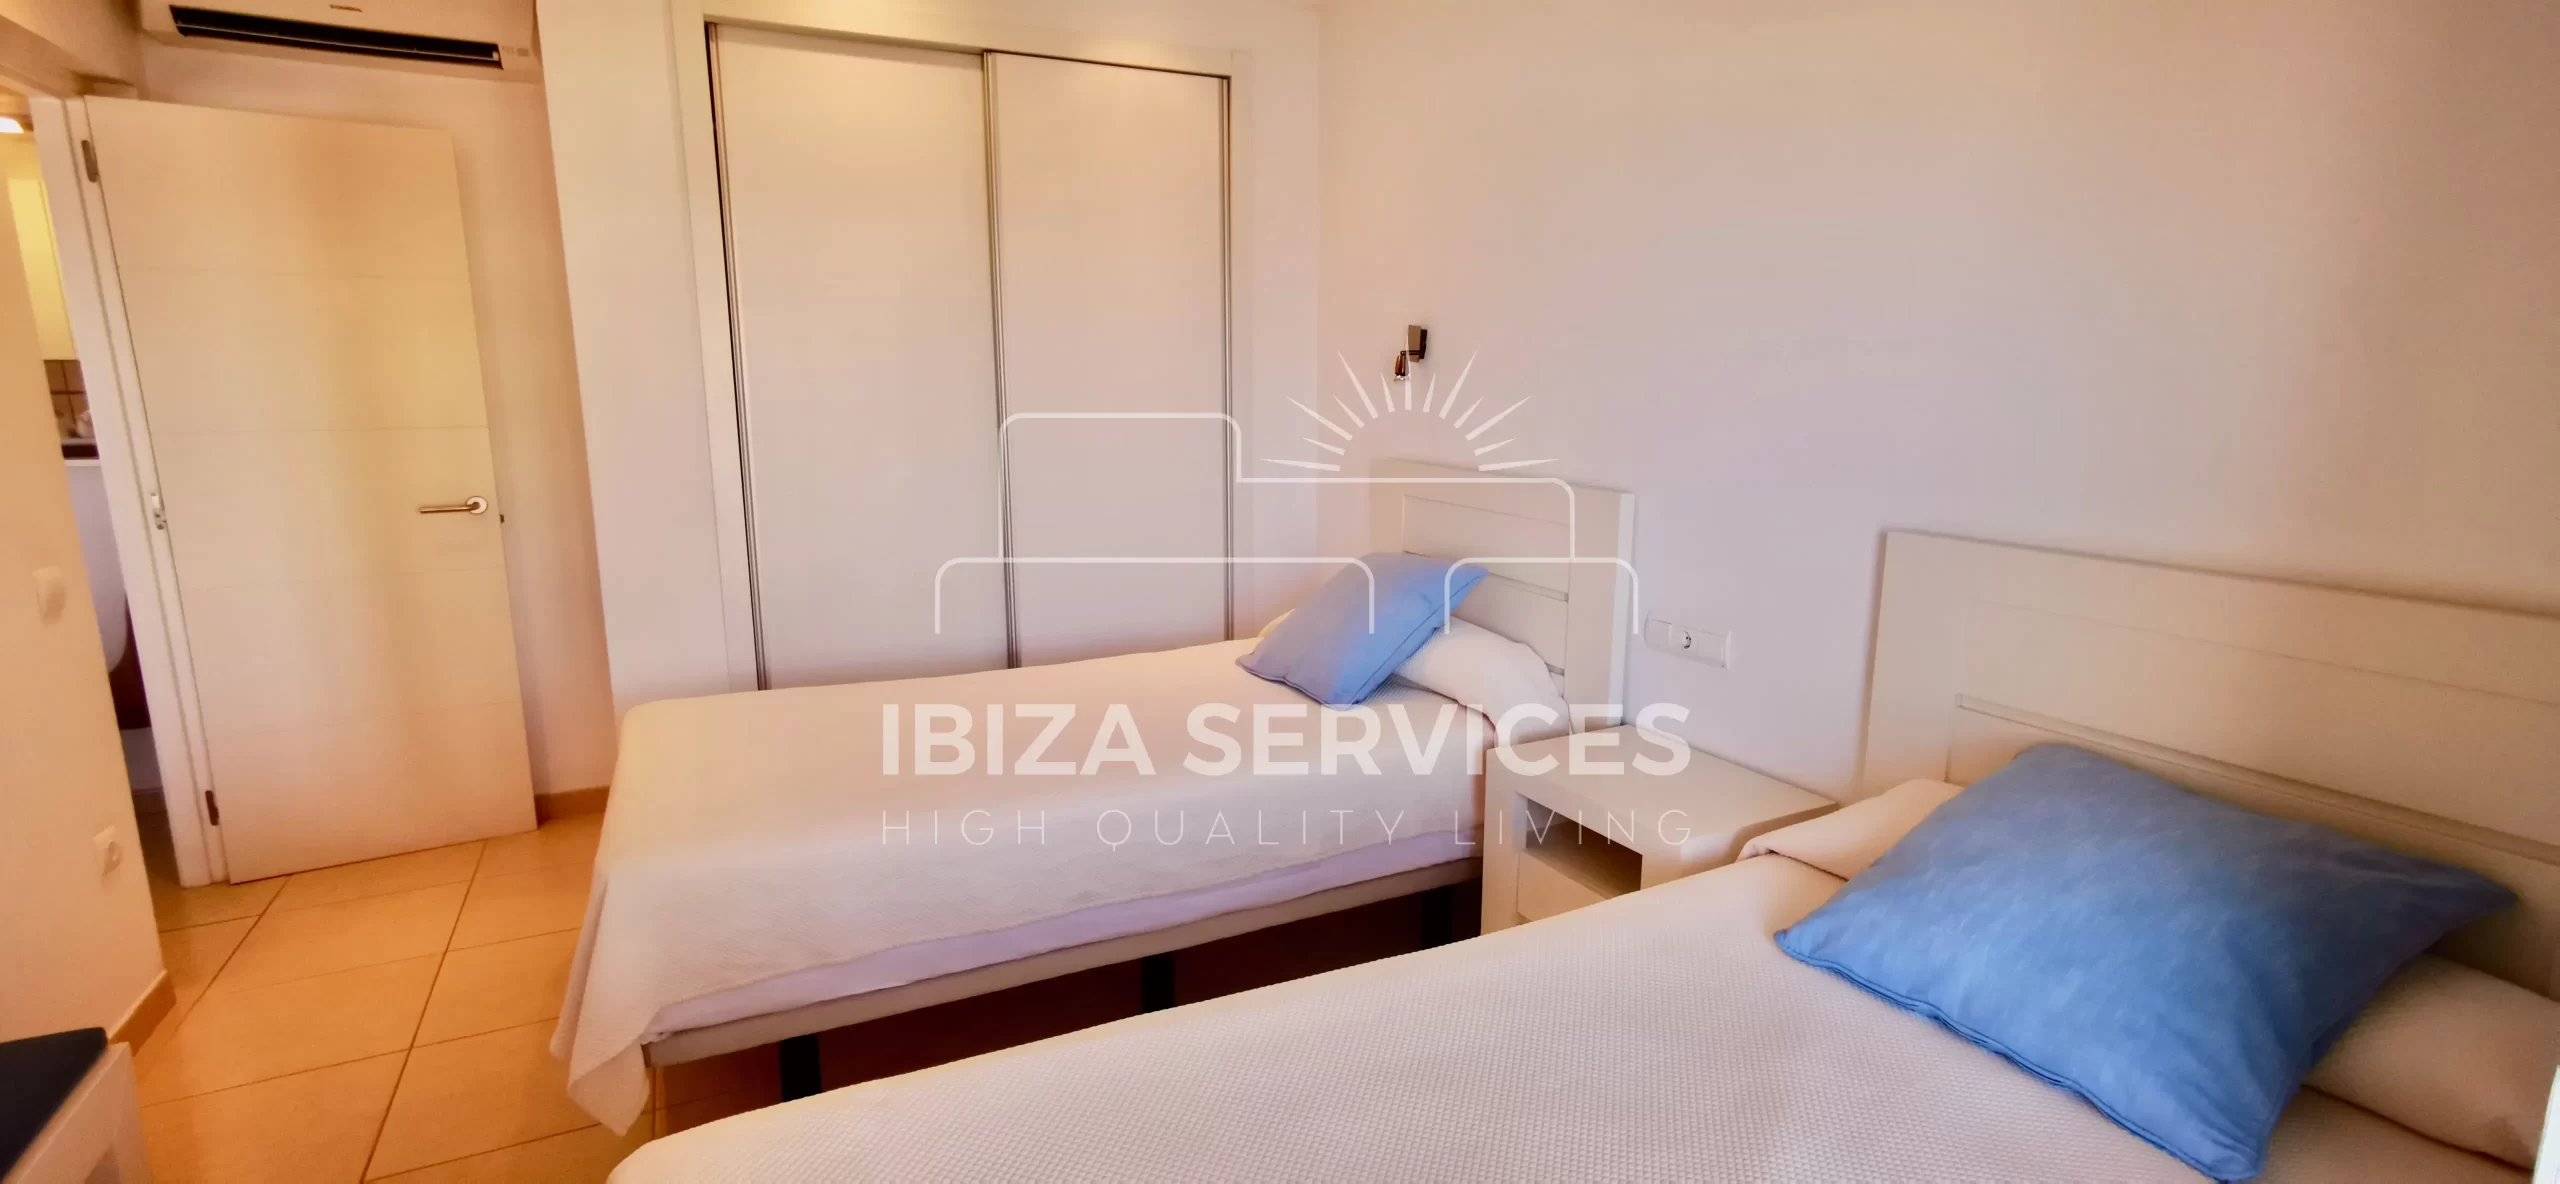 Spacious Apartment with Sea Views for Sale in Ibiza’s West Coast.